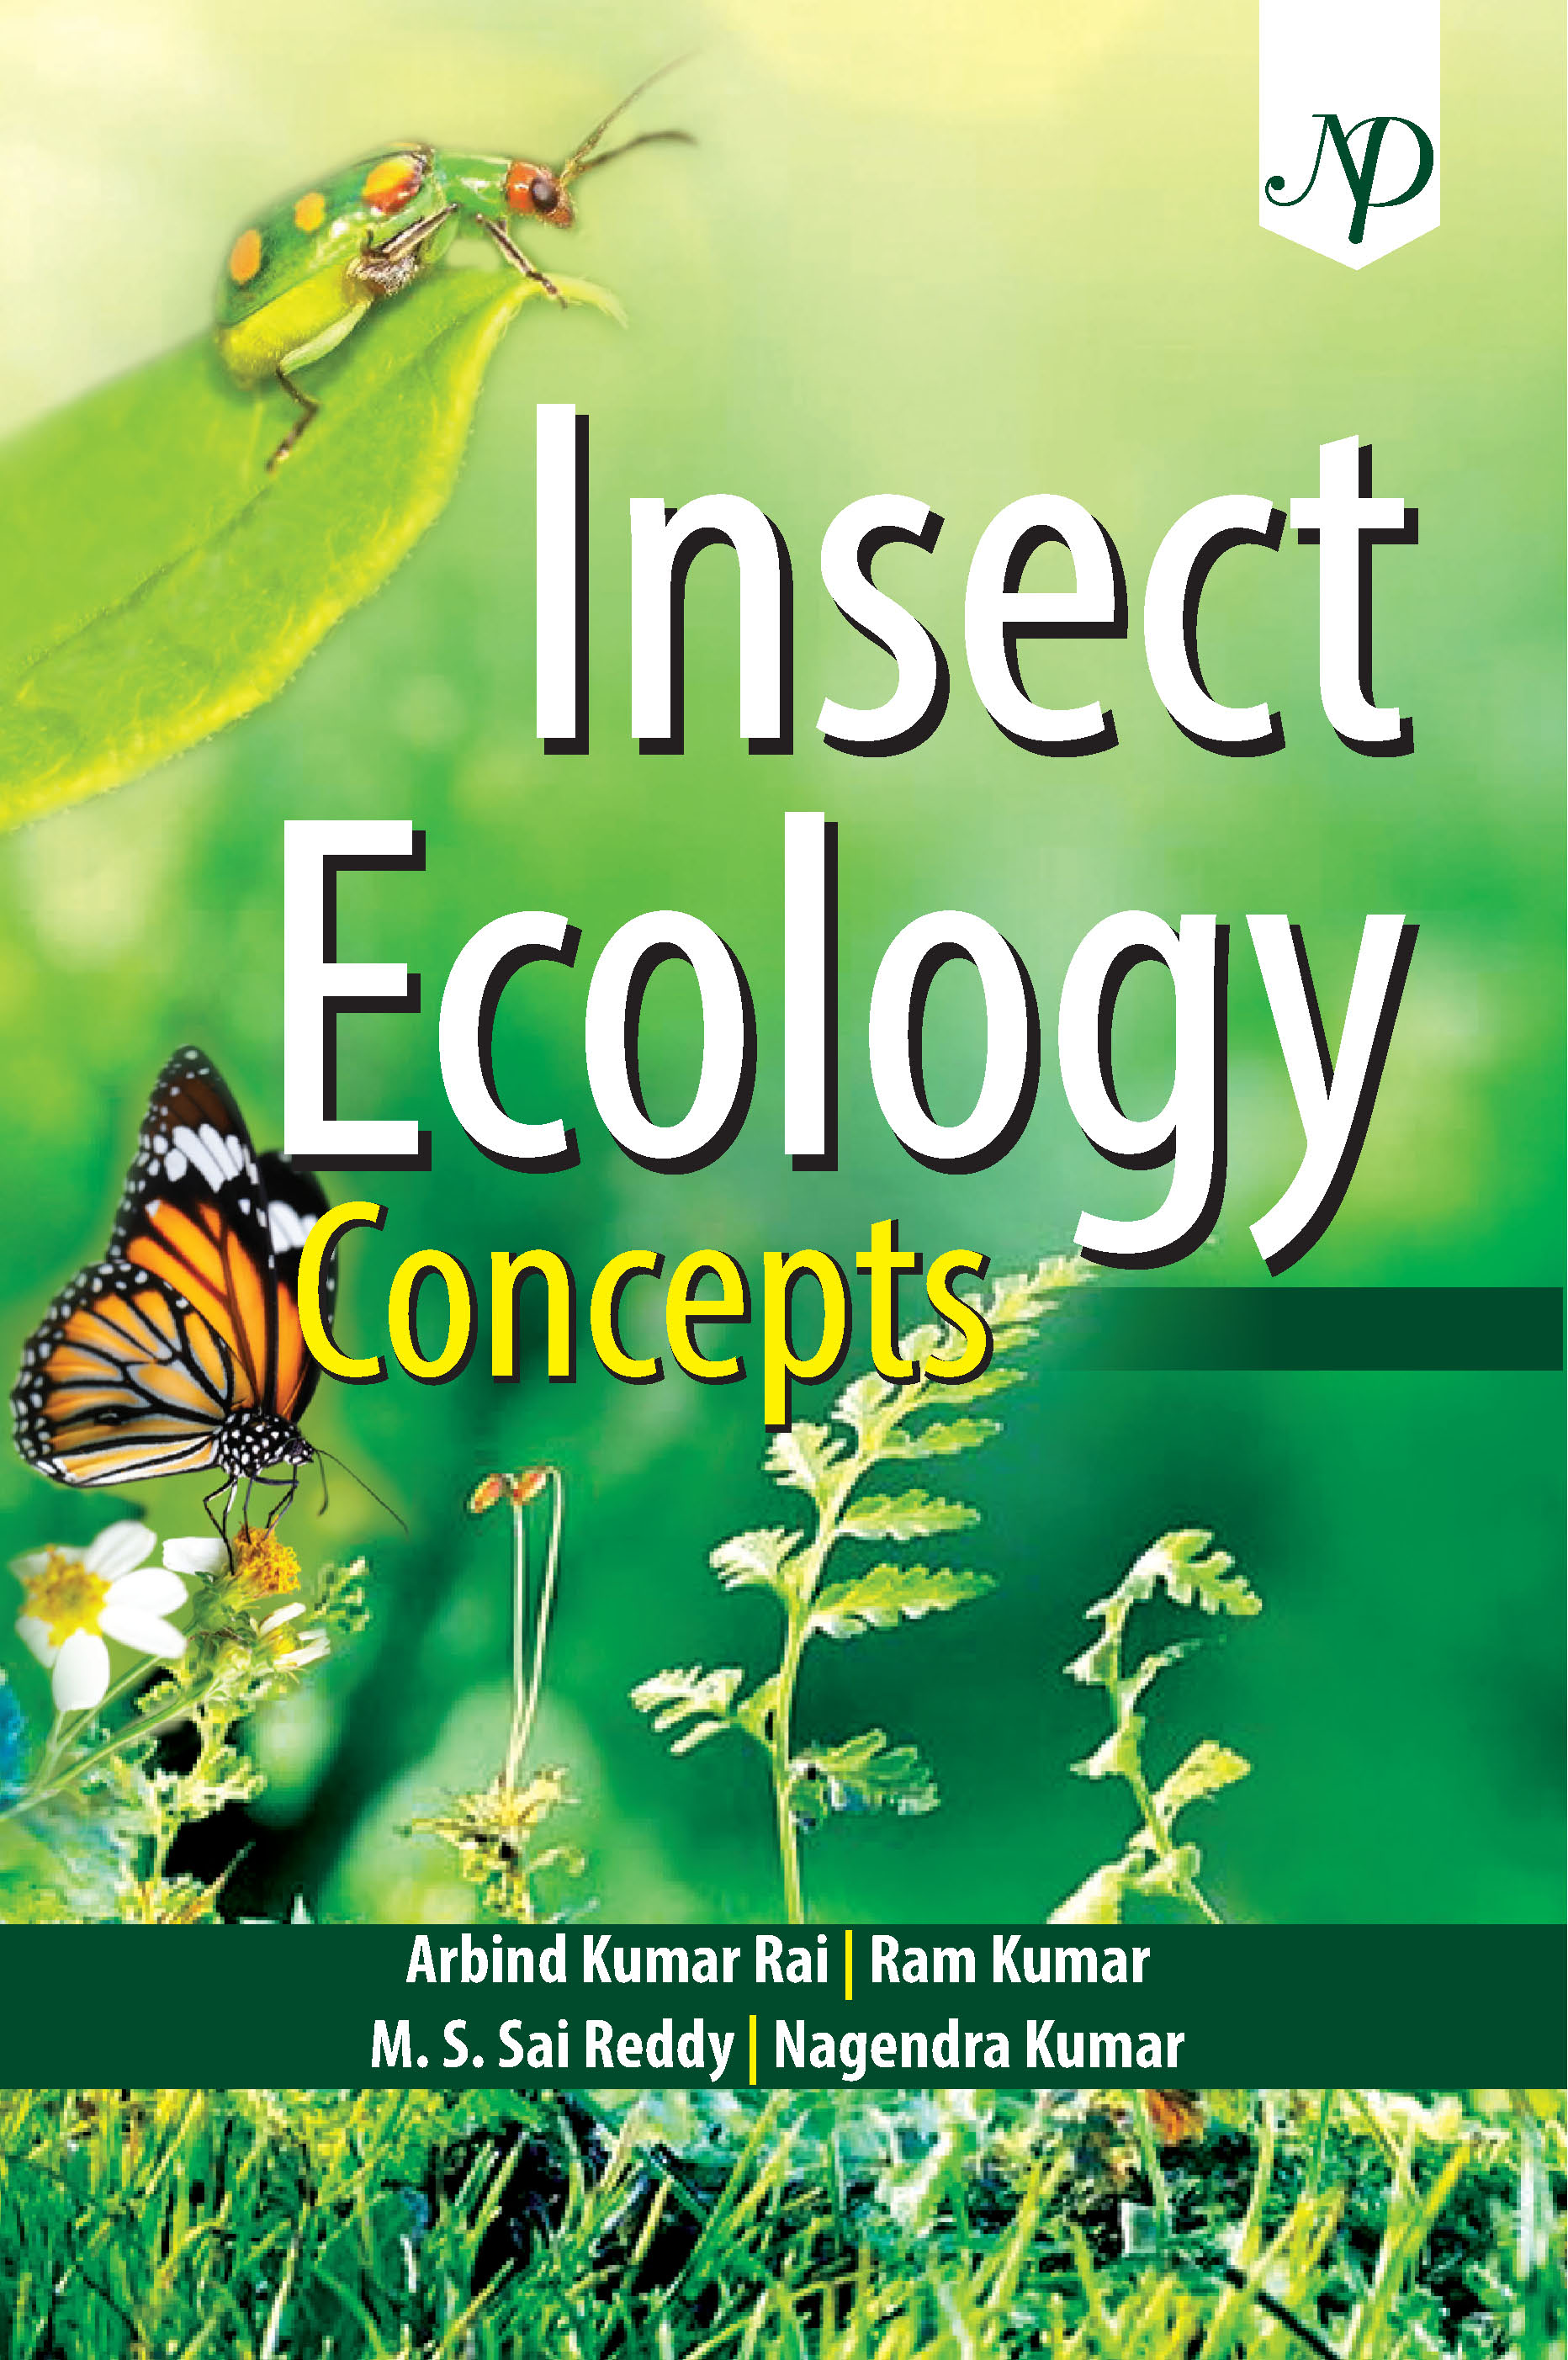 Insect Ecology: Concepts